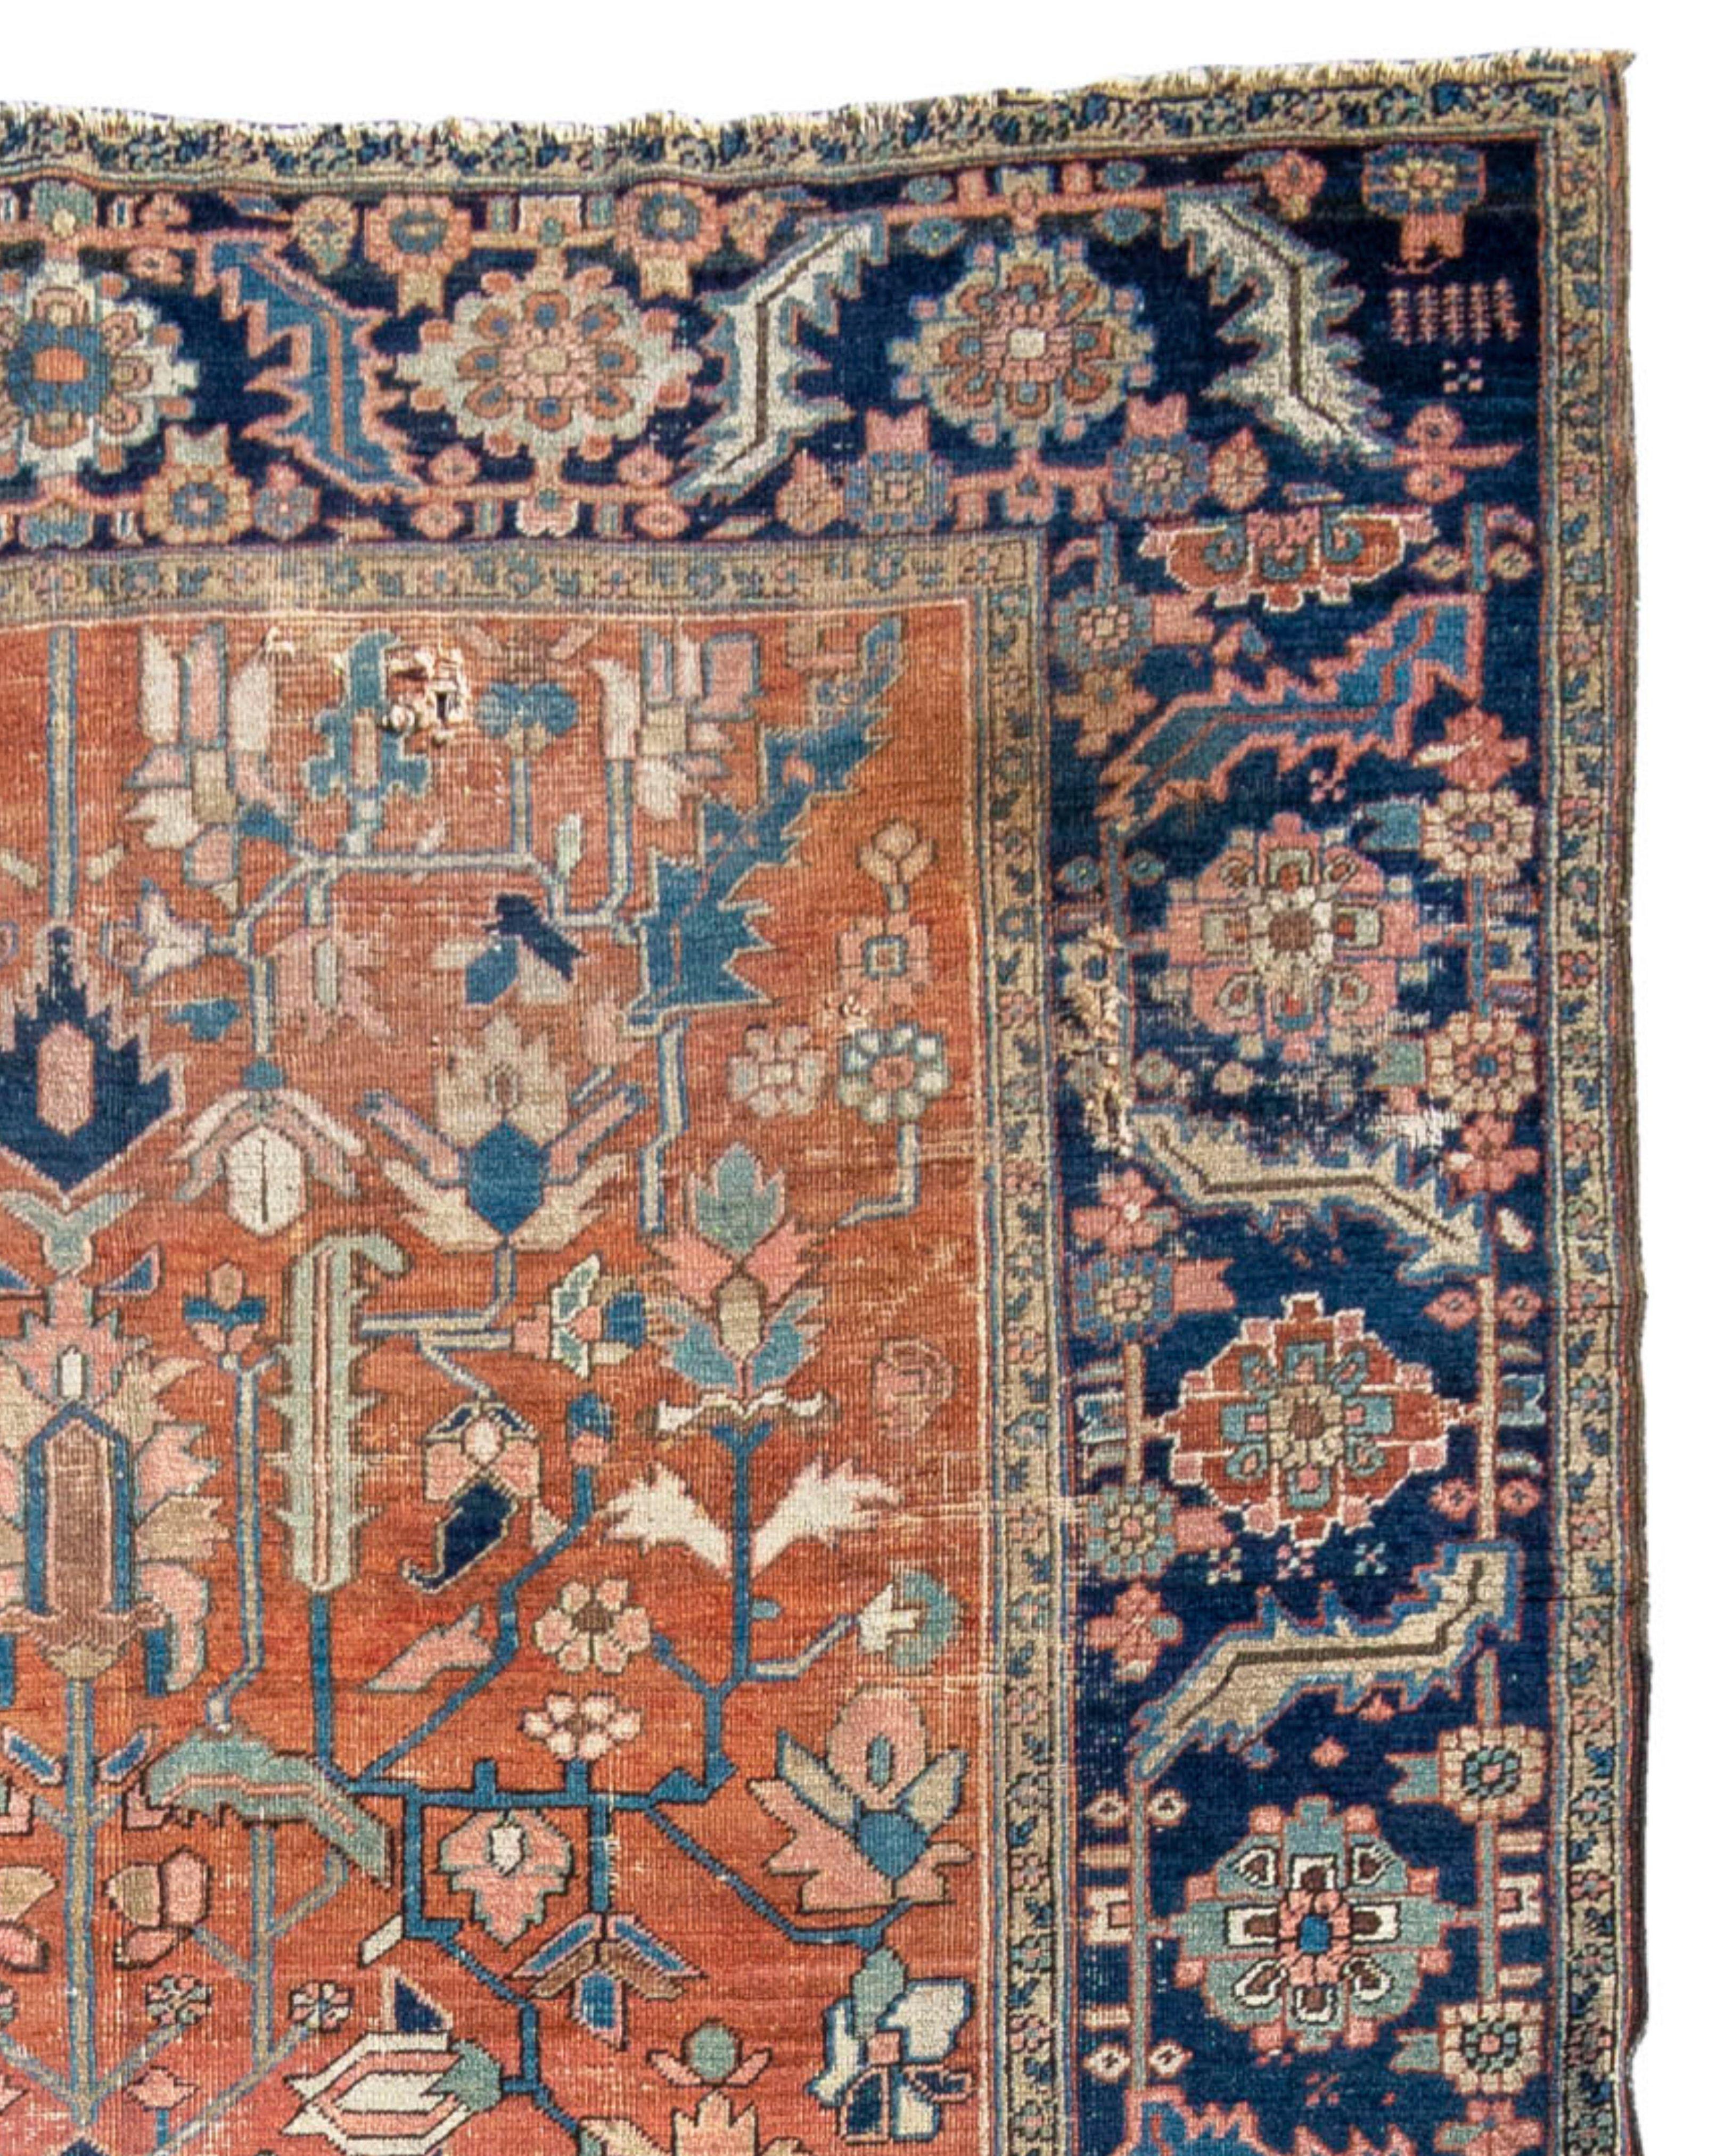 Antique Persian Bakhshaish Rug, Early 20th Century

Additional Information:
Dimensions: 8'5